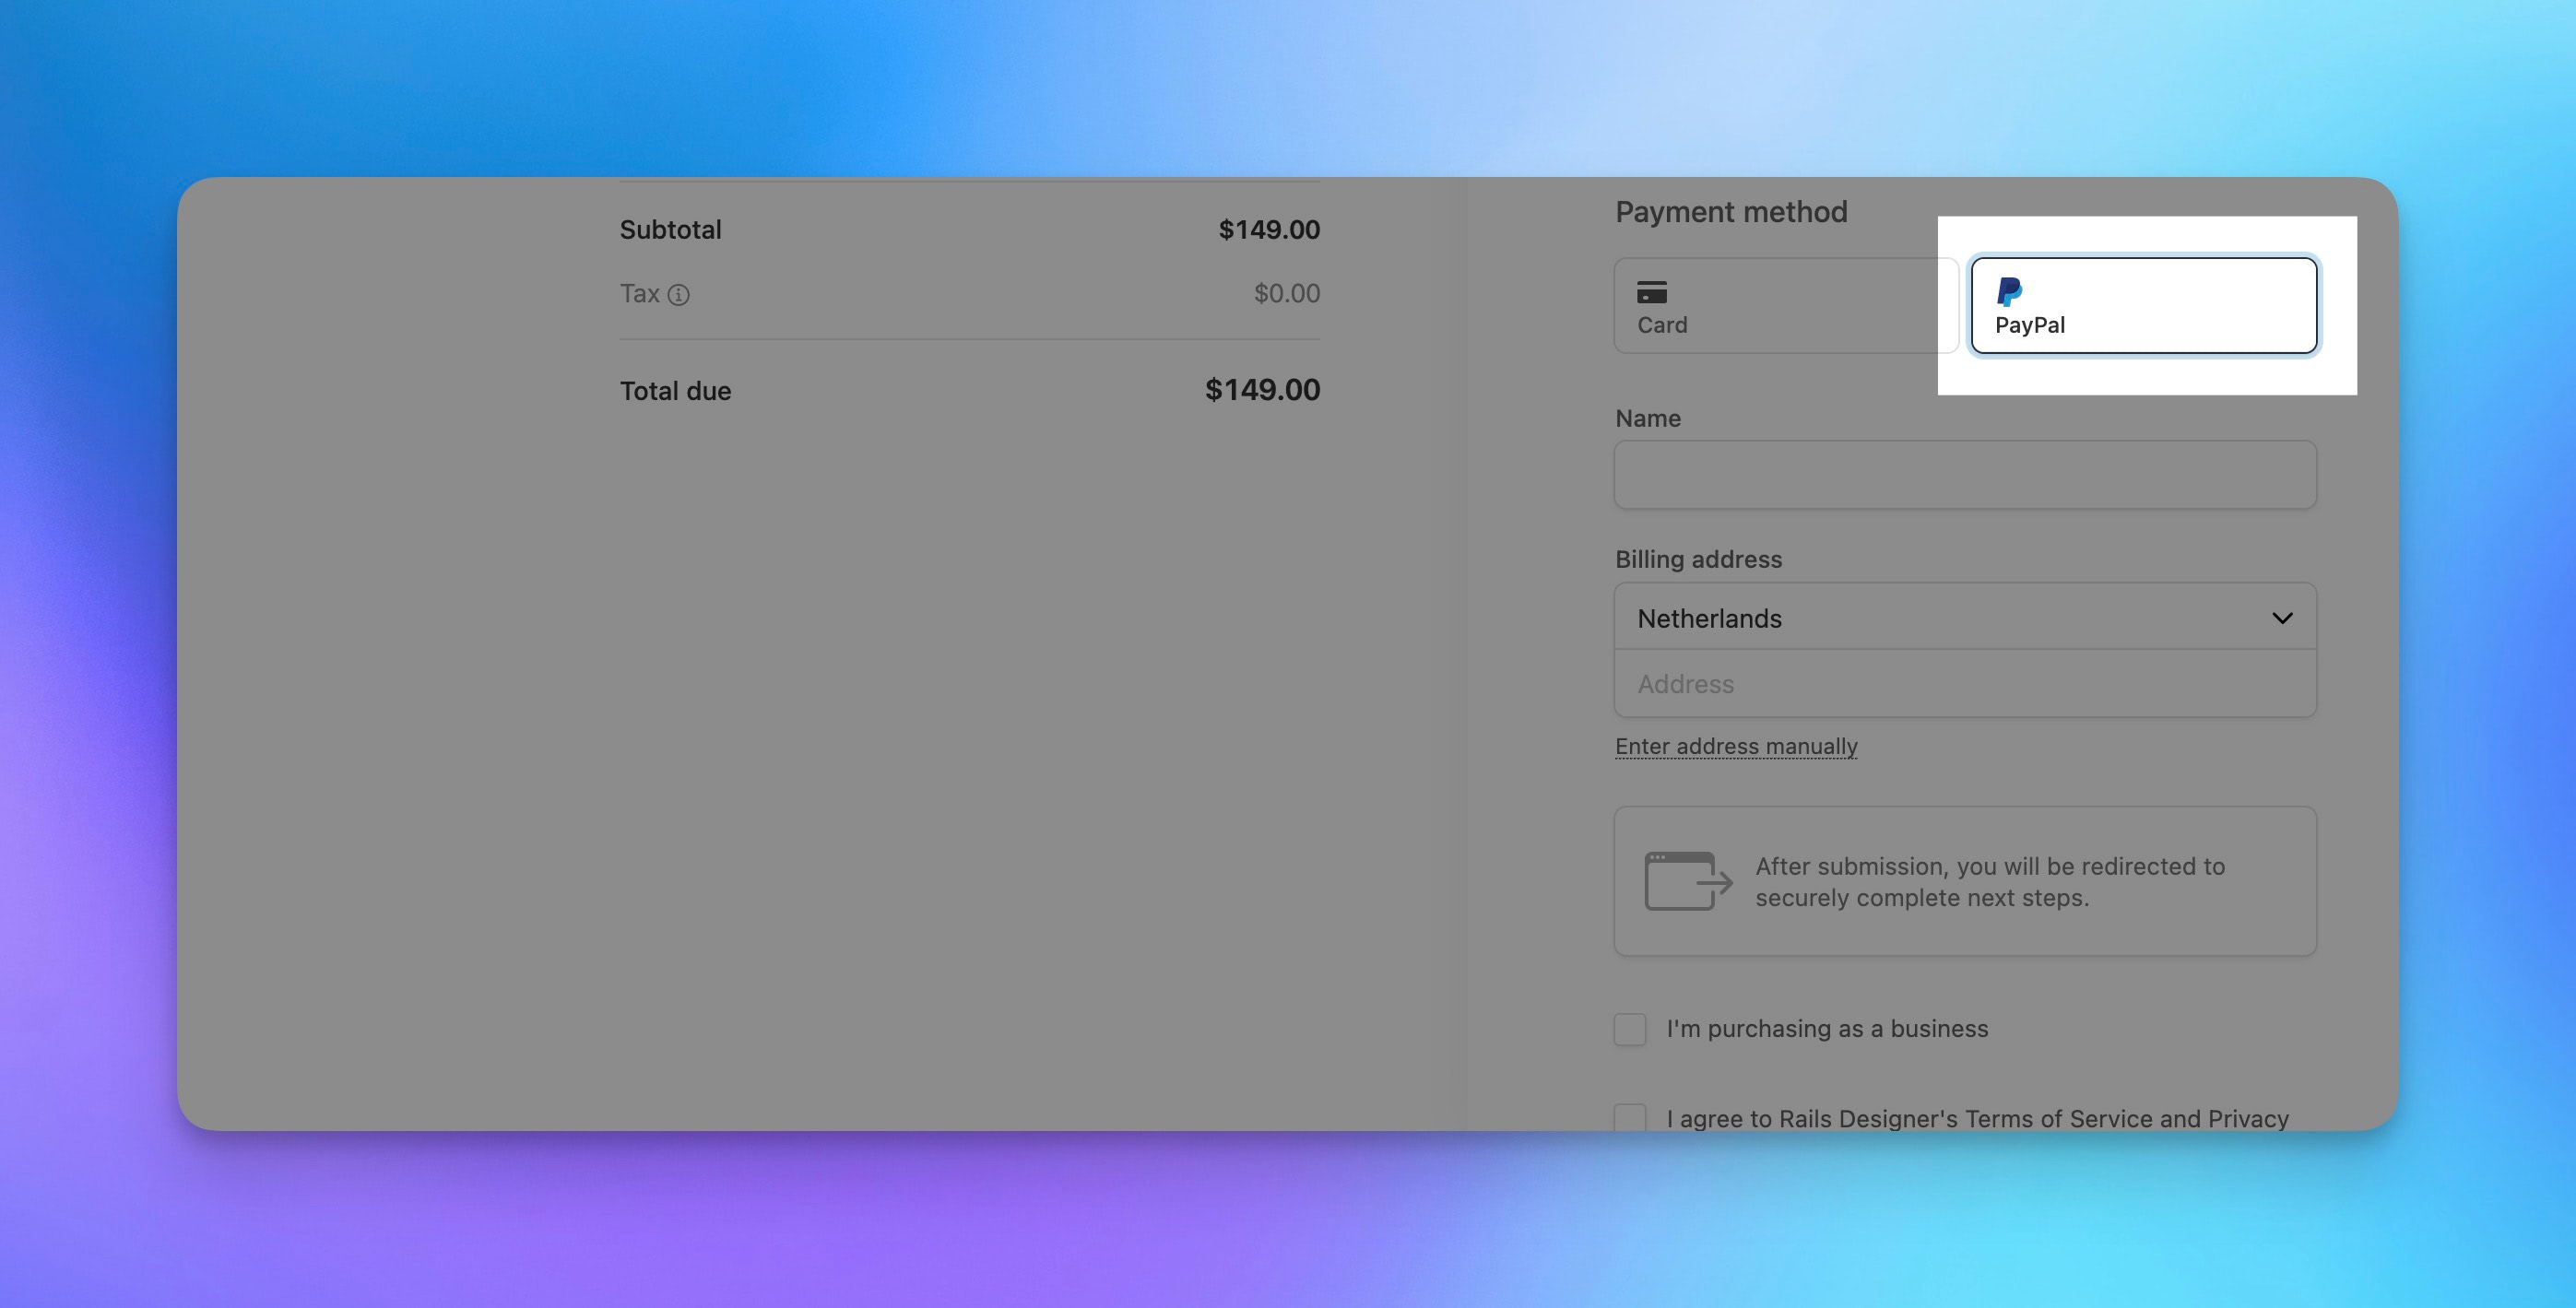 Preview of the Stripe checkout with the PayPal option